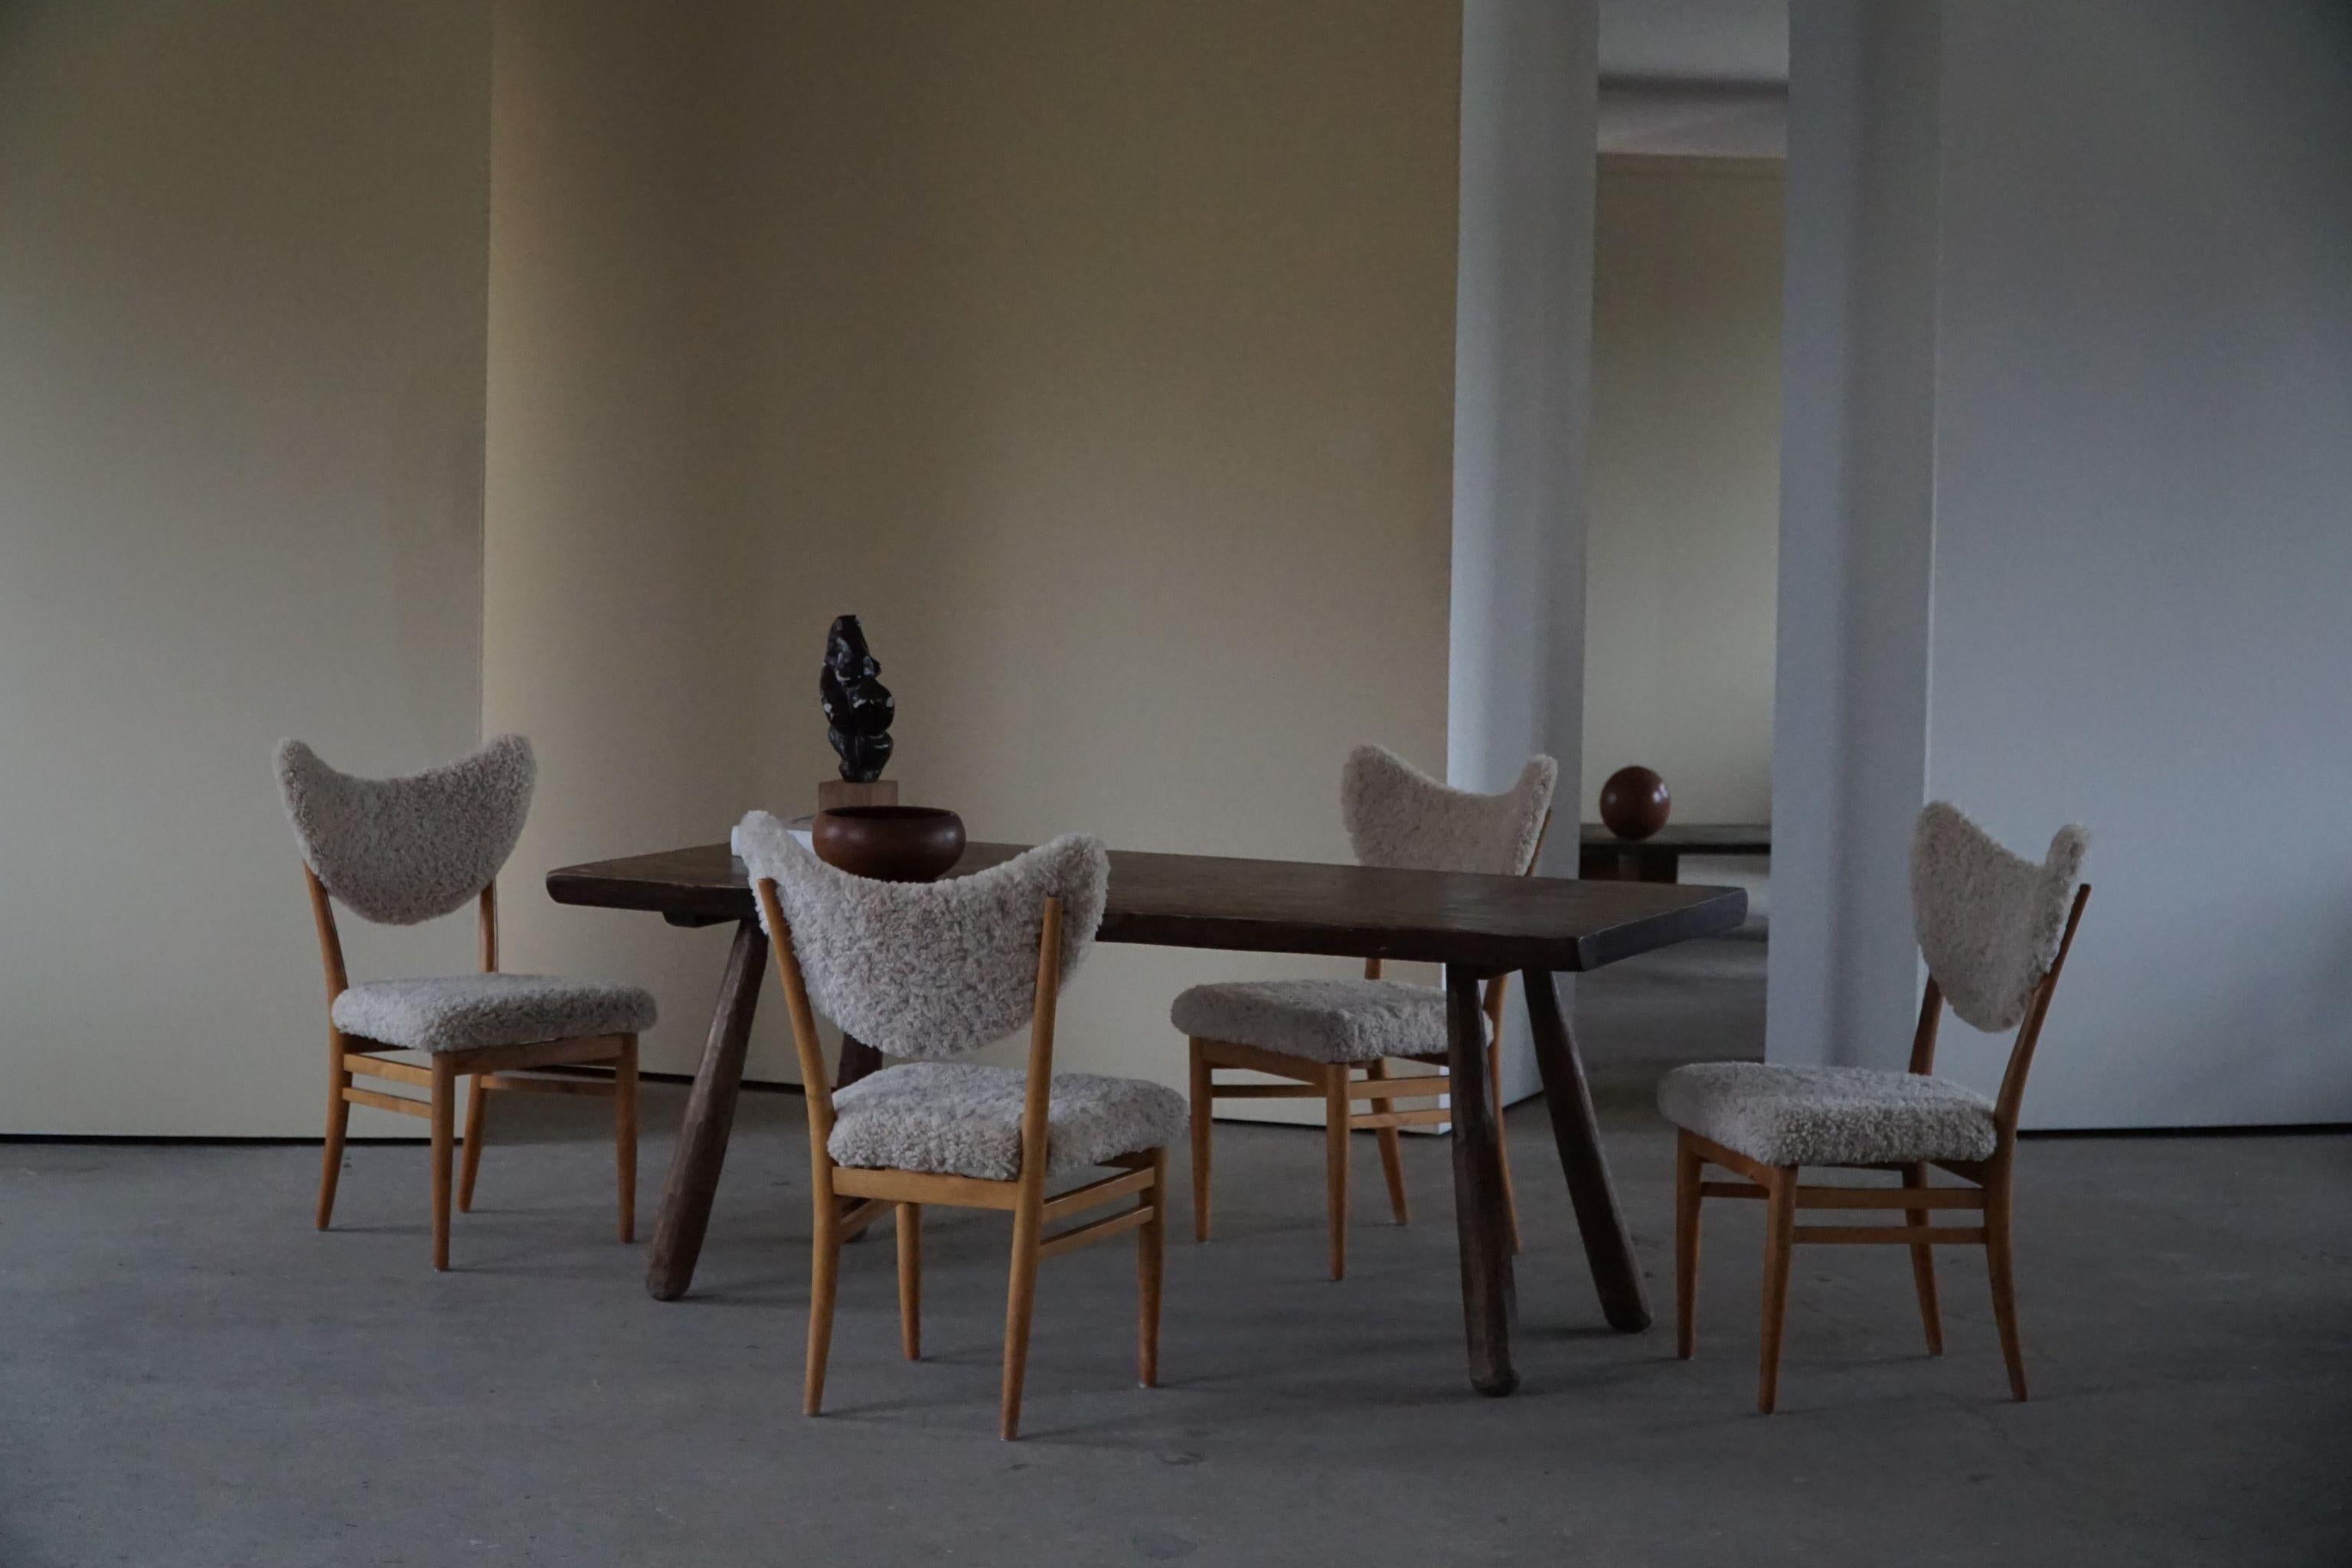 Hvidt & Mølgaard, Set of 4 Chairs in Ash, Reupholstered in Lambswool, 1950s In Good Condition For Sale In Odense, DK